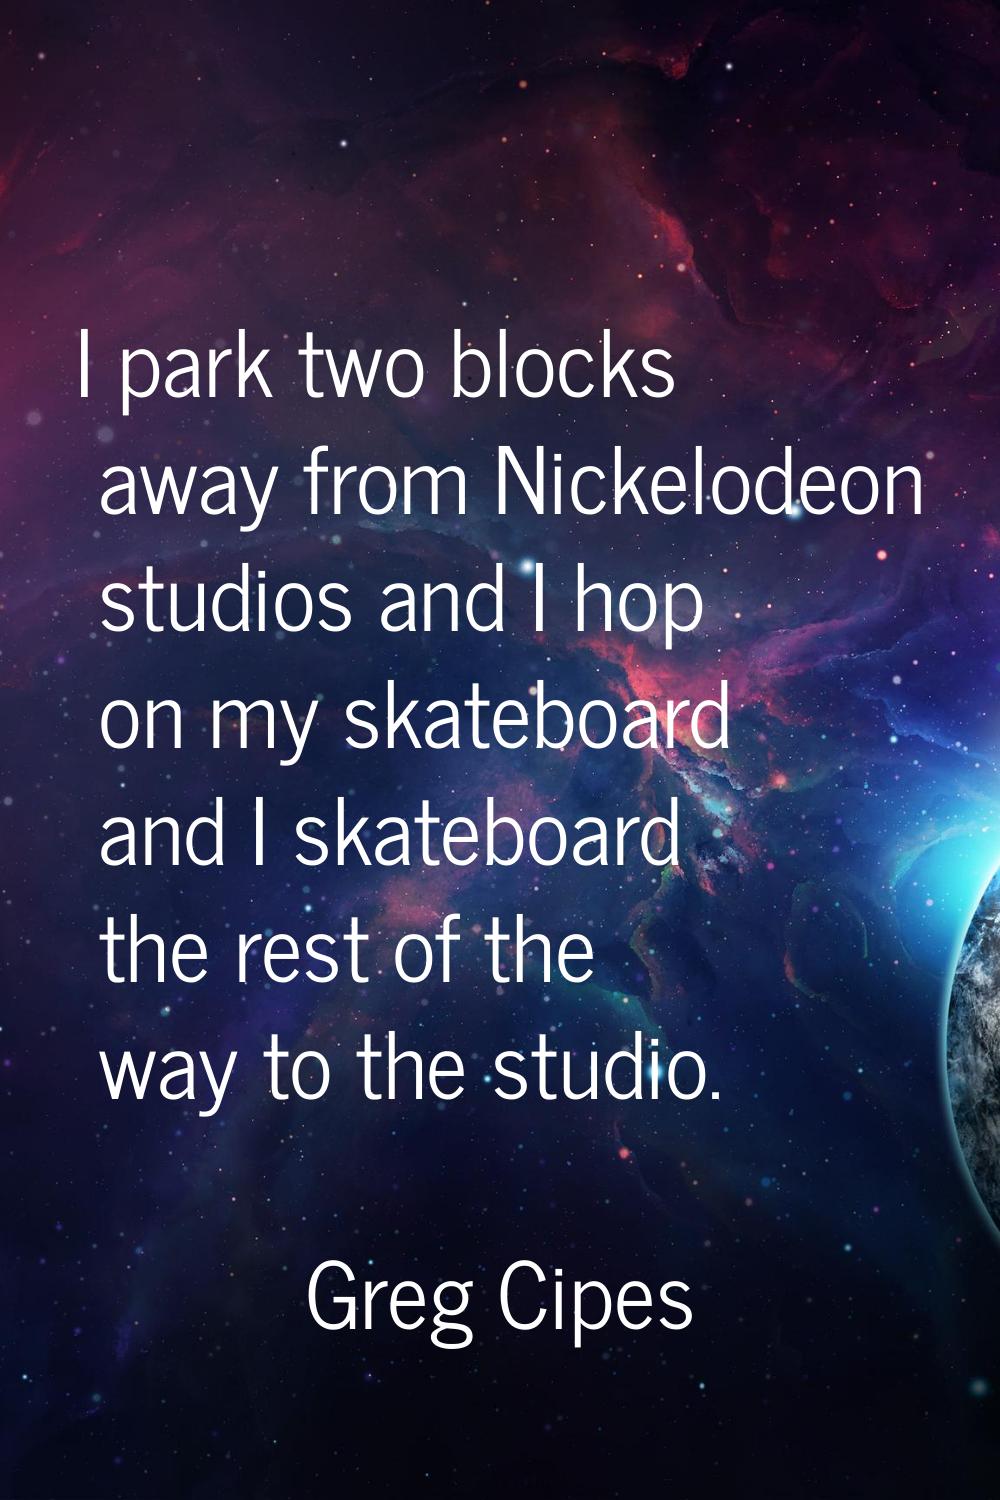 I park two blocks away from Nickelodeon studios and I hop on my skateboard and I skateboard the res